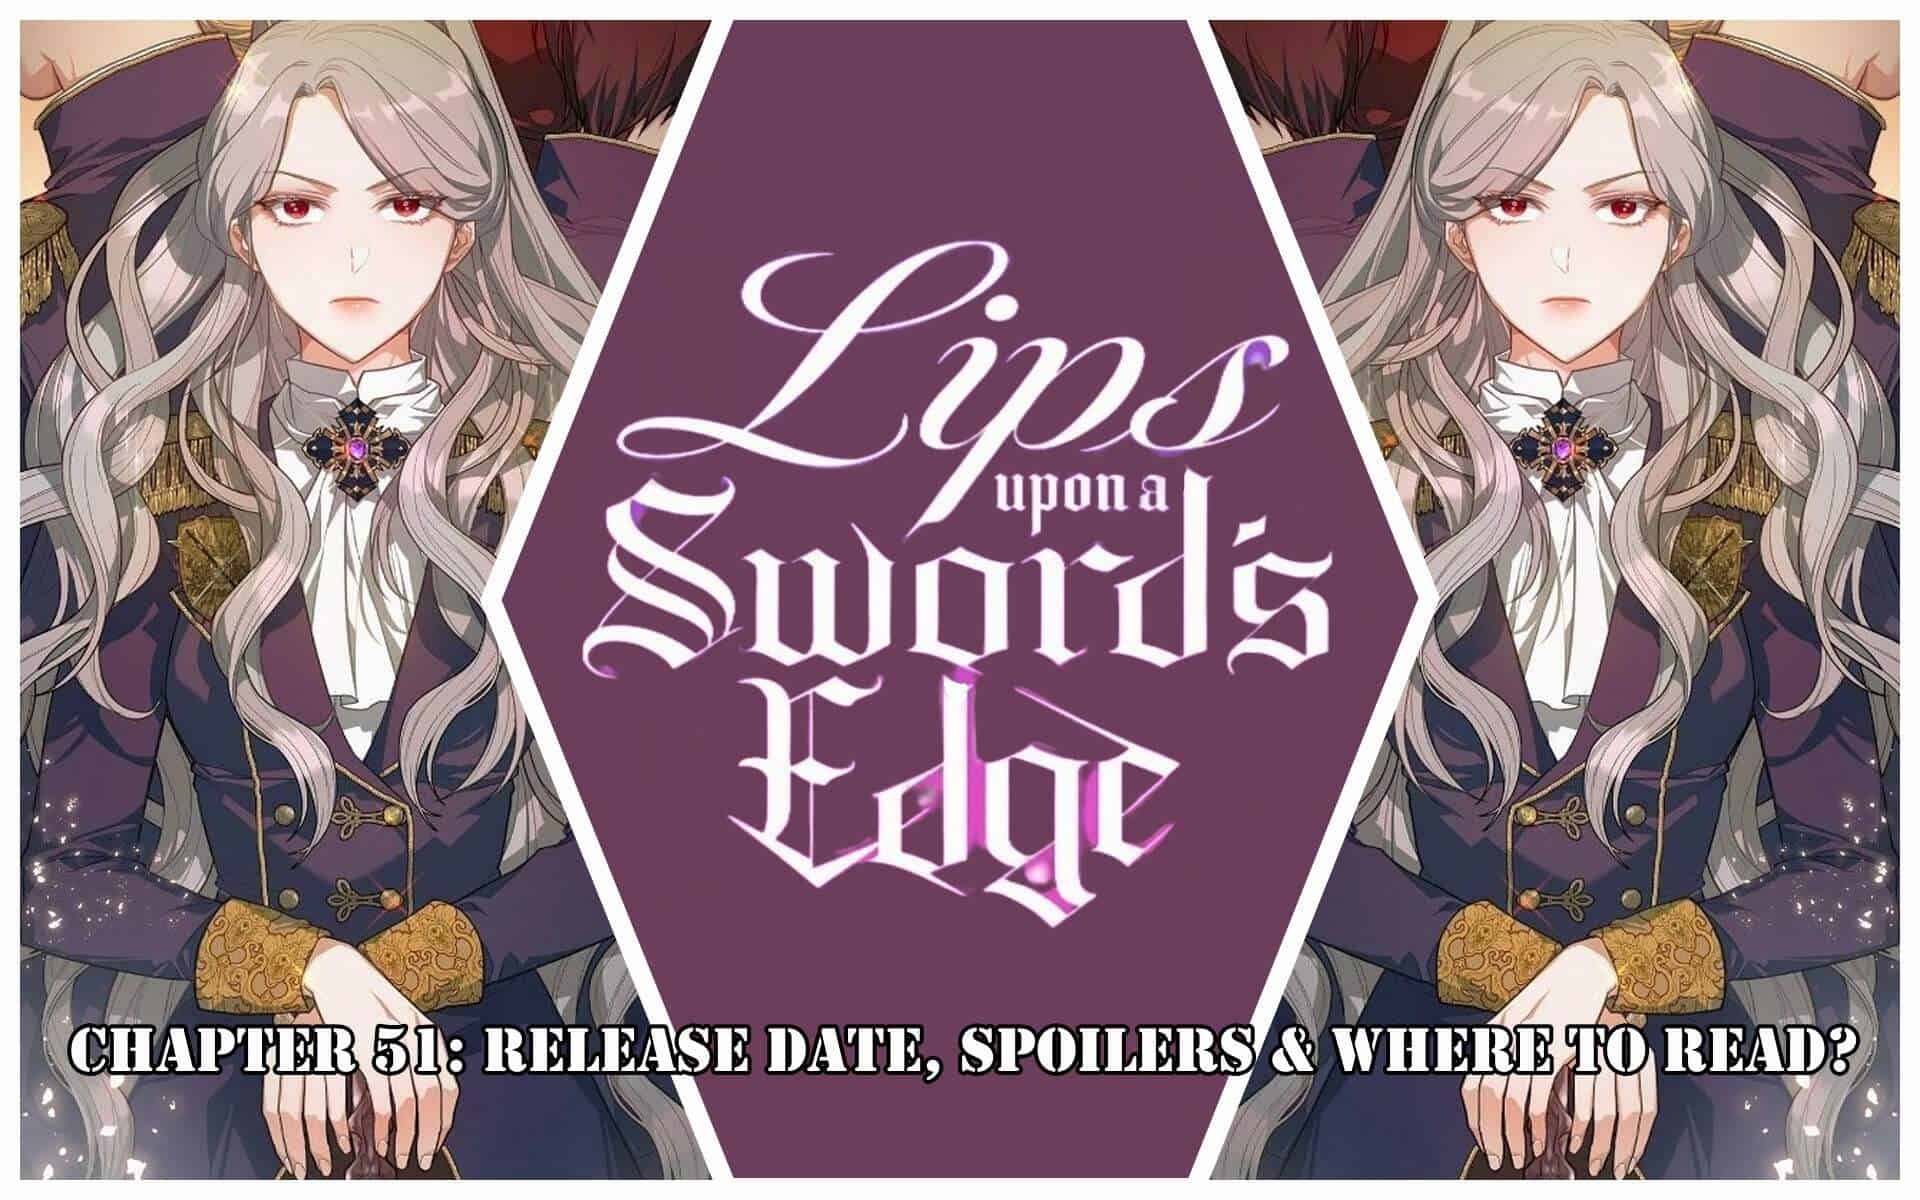 Lips On The Tip Of A Knife Chapter 51: Release Date, Spoilers & Where to Read?